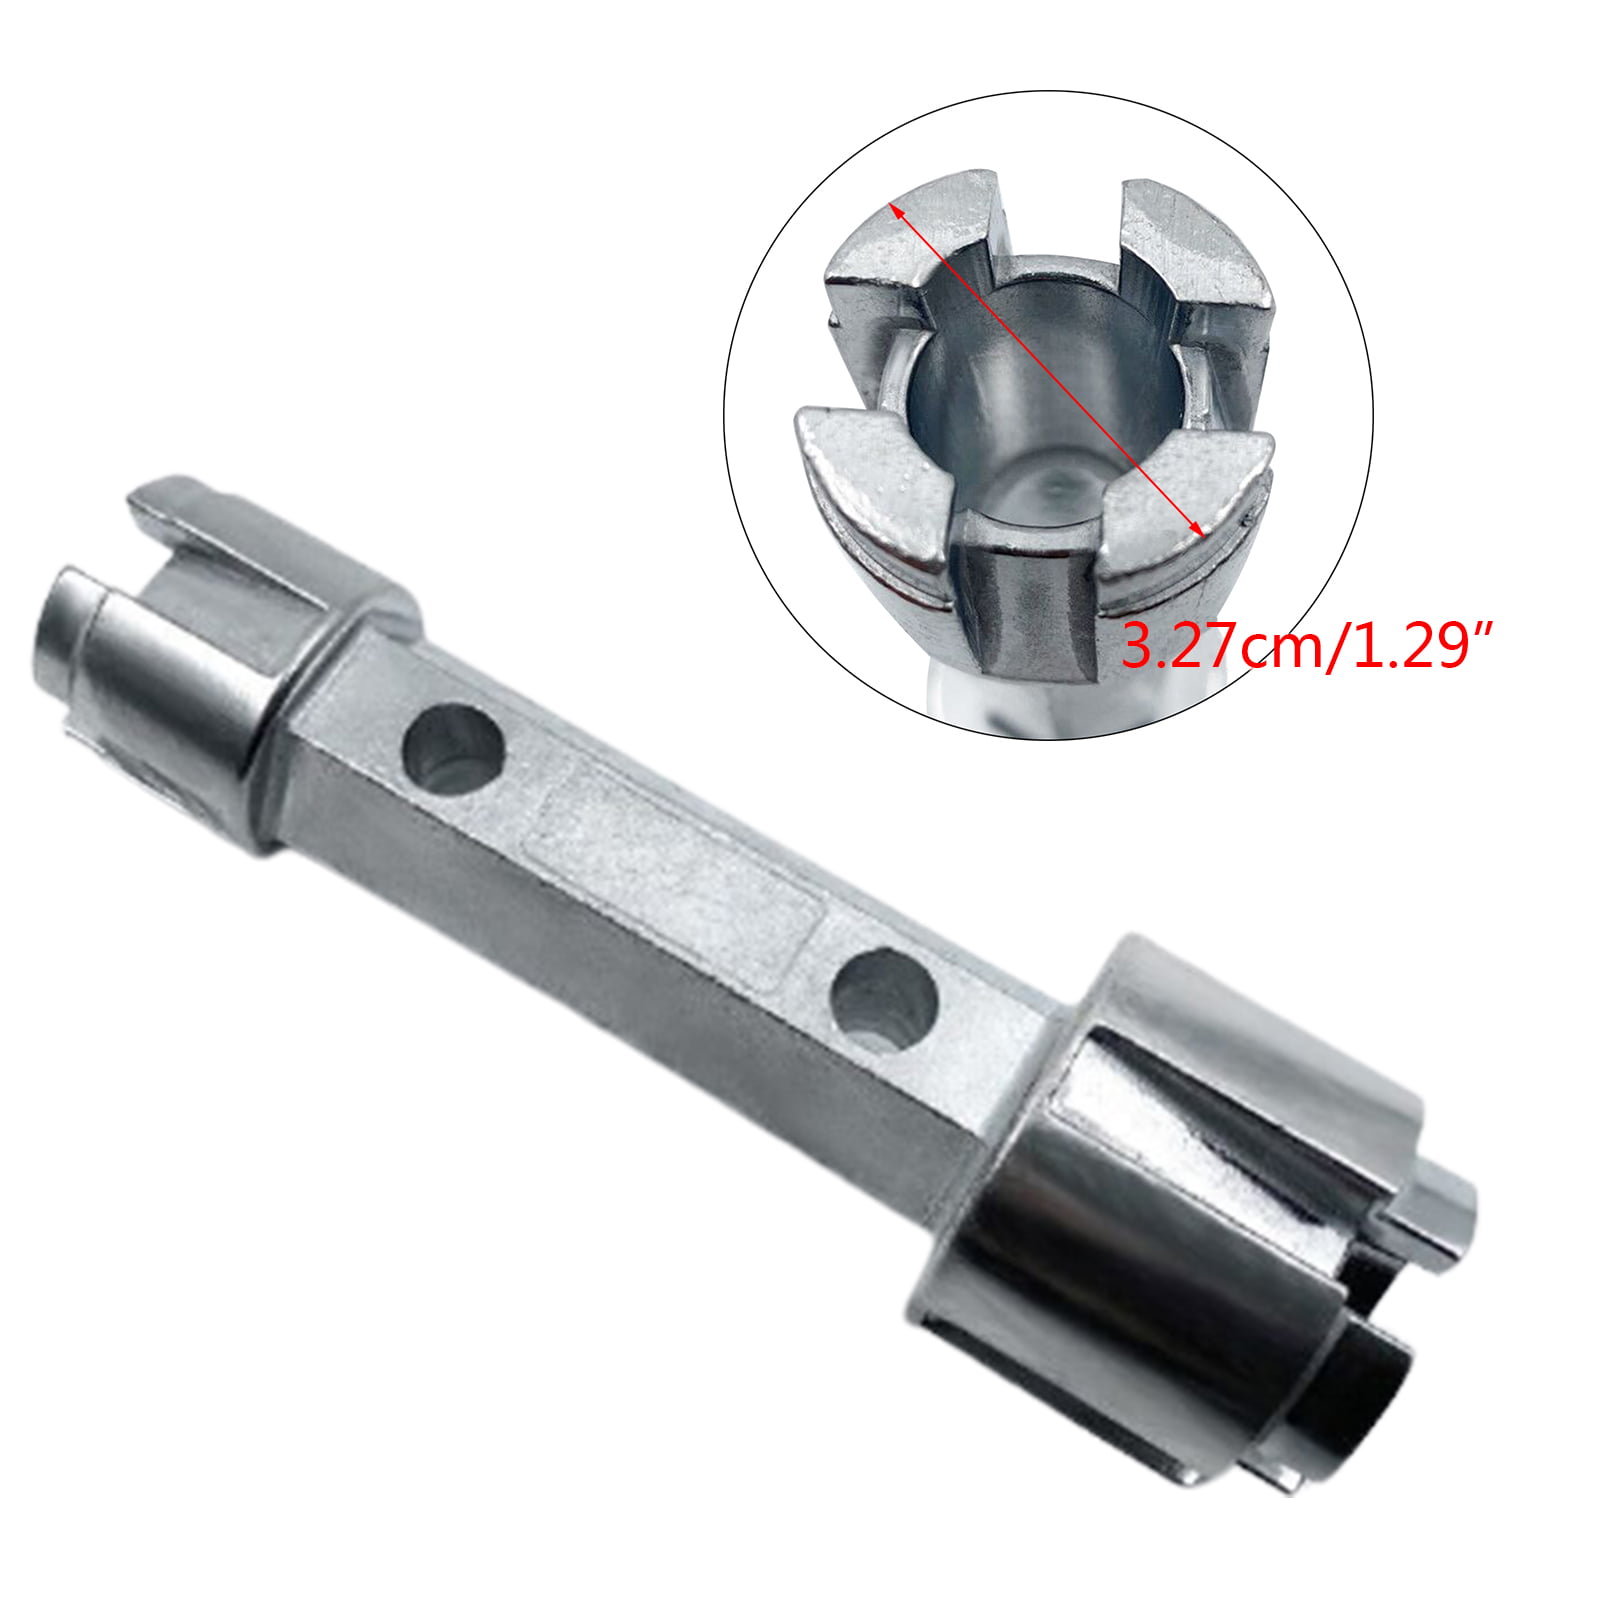 Bdmetals Tub Drain Remover Wrench-Die-Cast Aluminum Tub Drain Tool Wrench  for Bathroom and Bathhouse